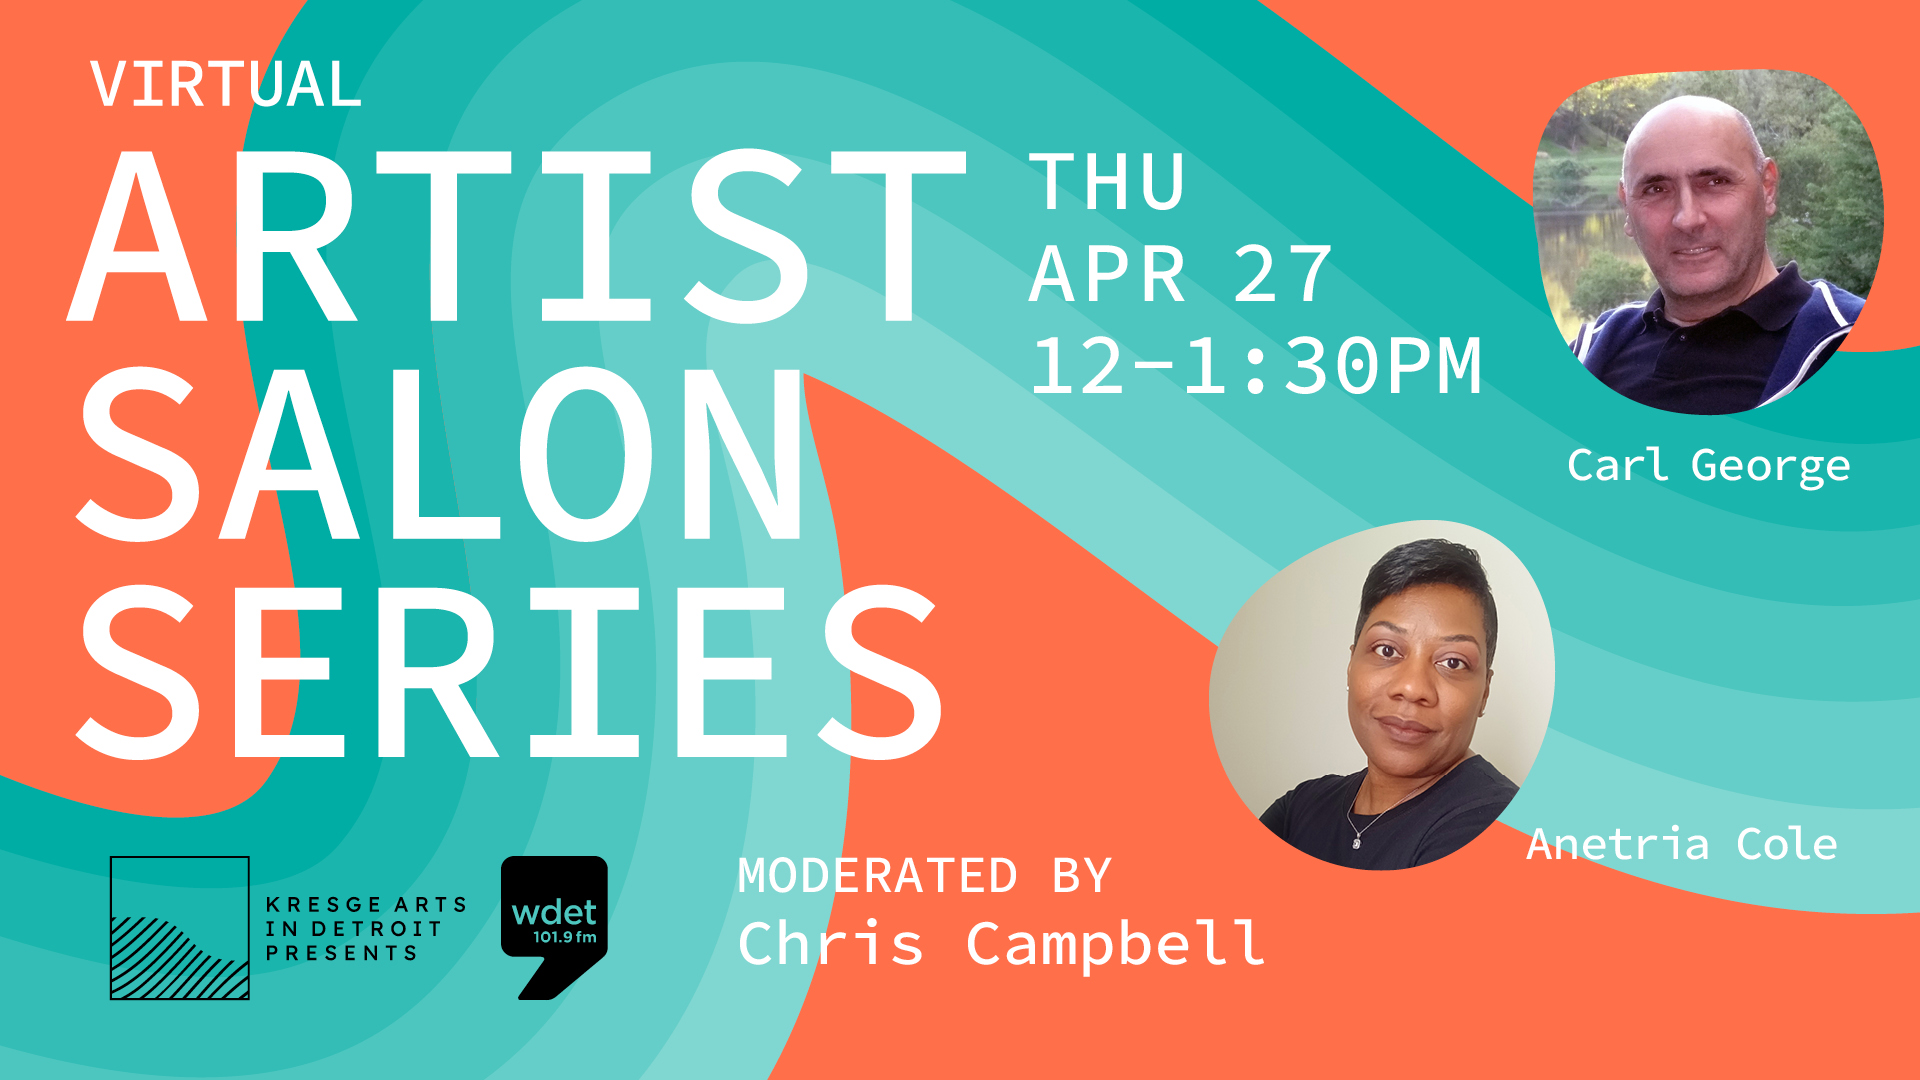 orange and teal graphic promoting Kresge's Virtual Artist Salon Series with Carl George and Anetria Cole